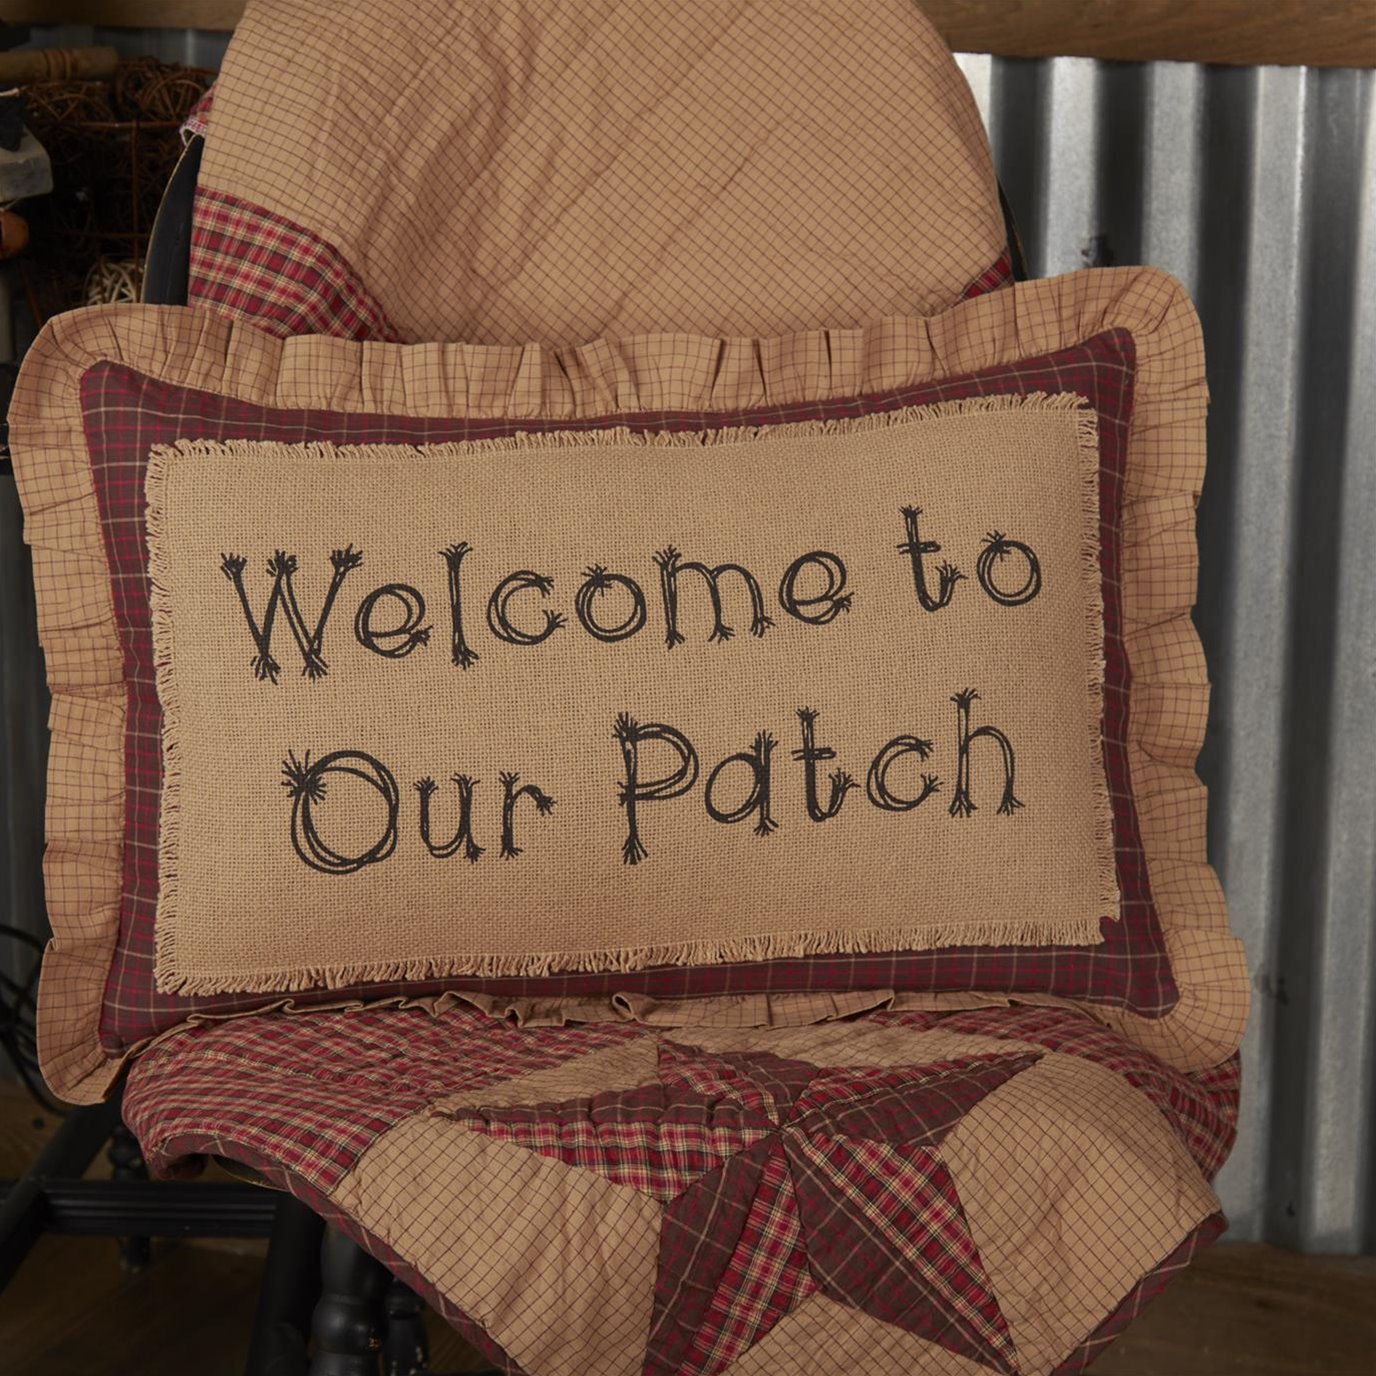 Landon Welcome to Our Patch Pillow 14x22